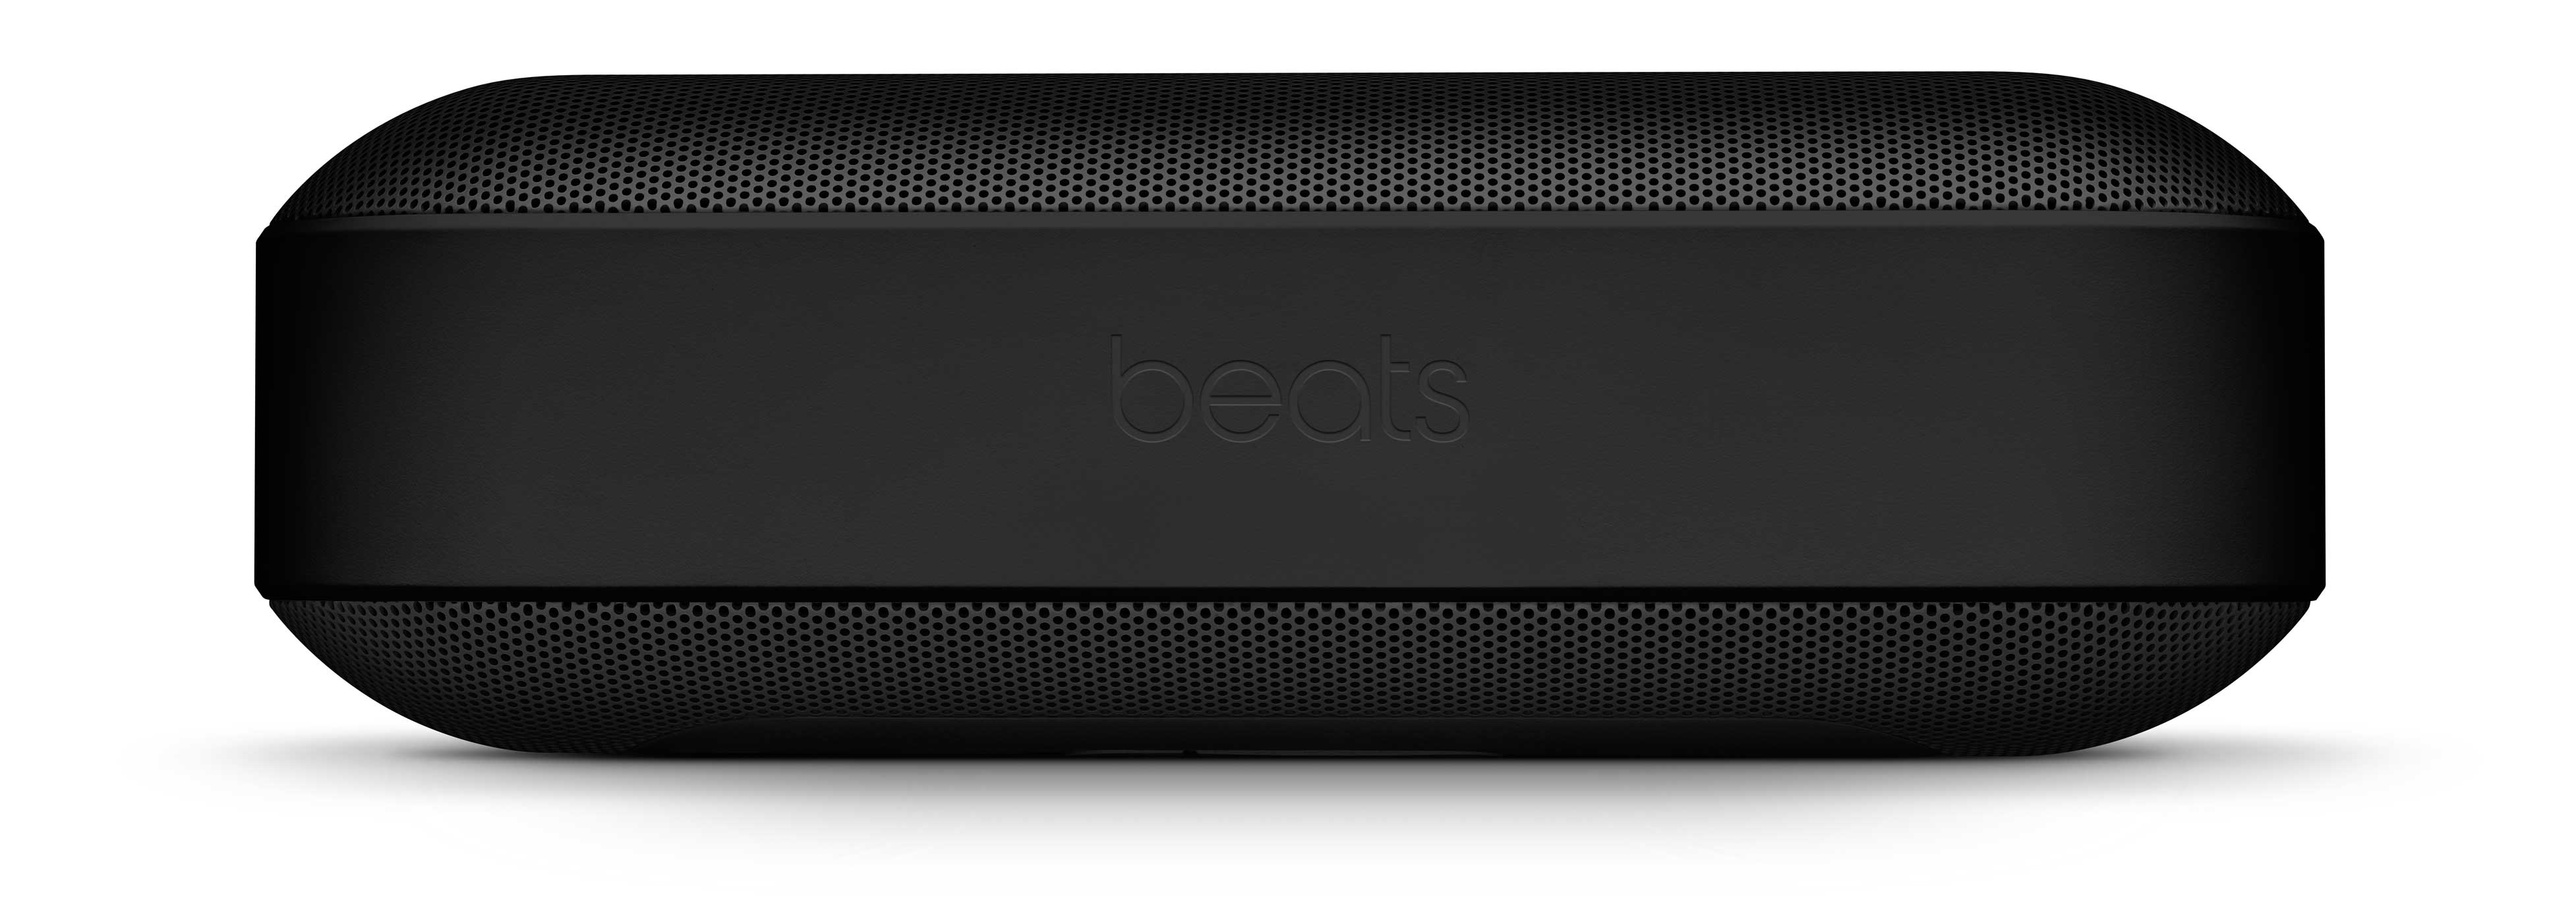 Beats by Dr. Dre Pill+ Portable Bluetooth Speaker, Black, ML4M2LL/A - image 2 of 10